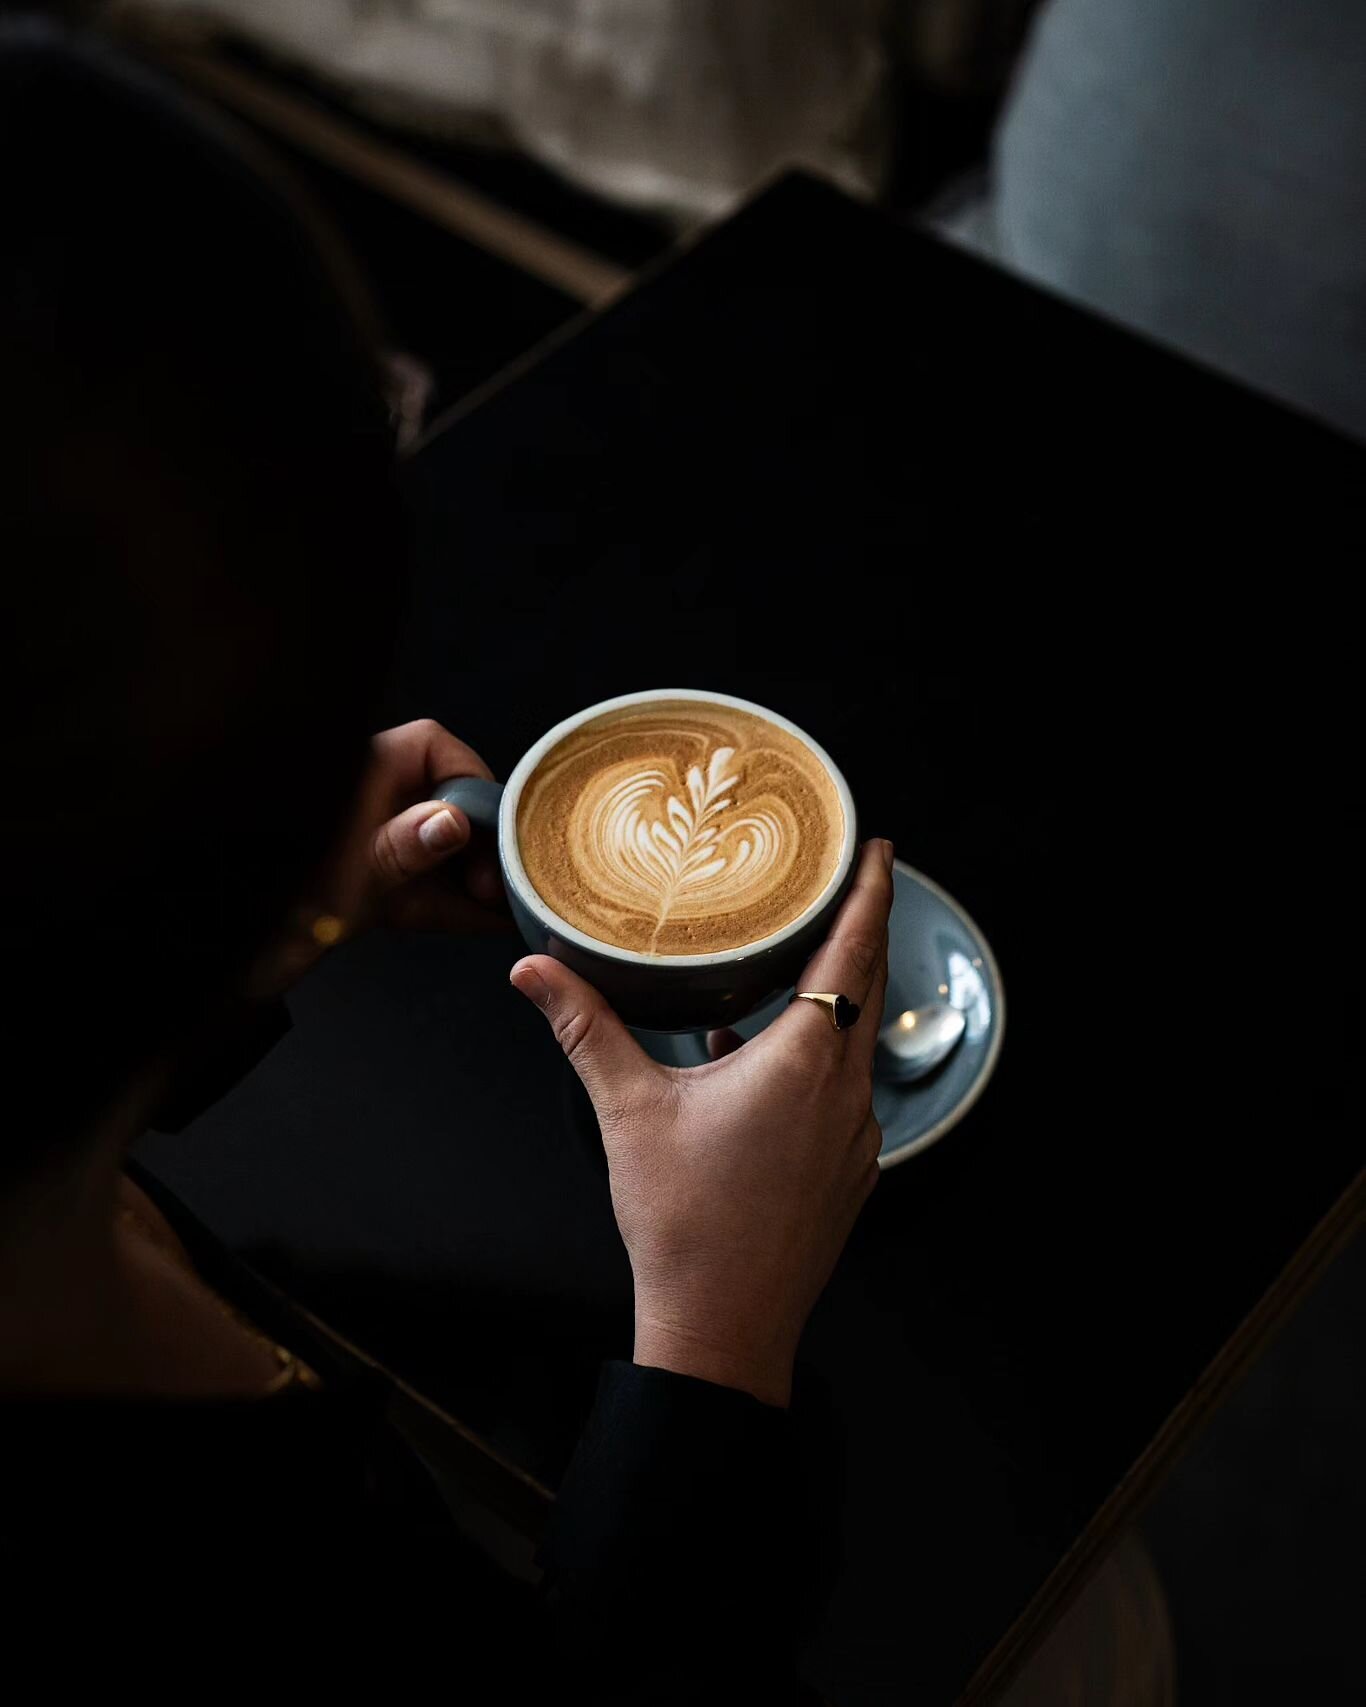 Taste the rich aroma and warmth of freshly brewed coffee @darkhorsewickham

We take a hands-on approach with our wholesale partners, setting them up for success with top-of-the-range equipment, training and ongoing support. 

Head to our website to f